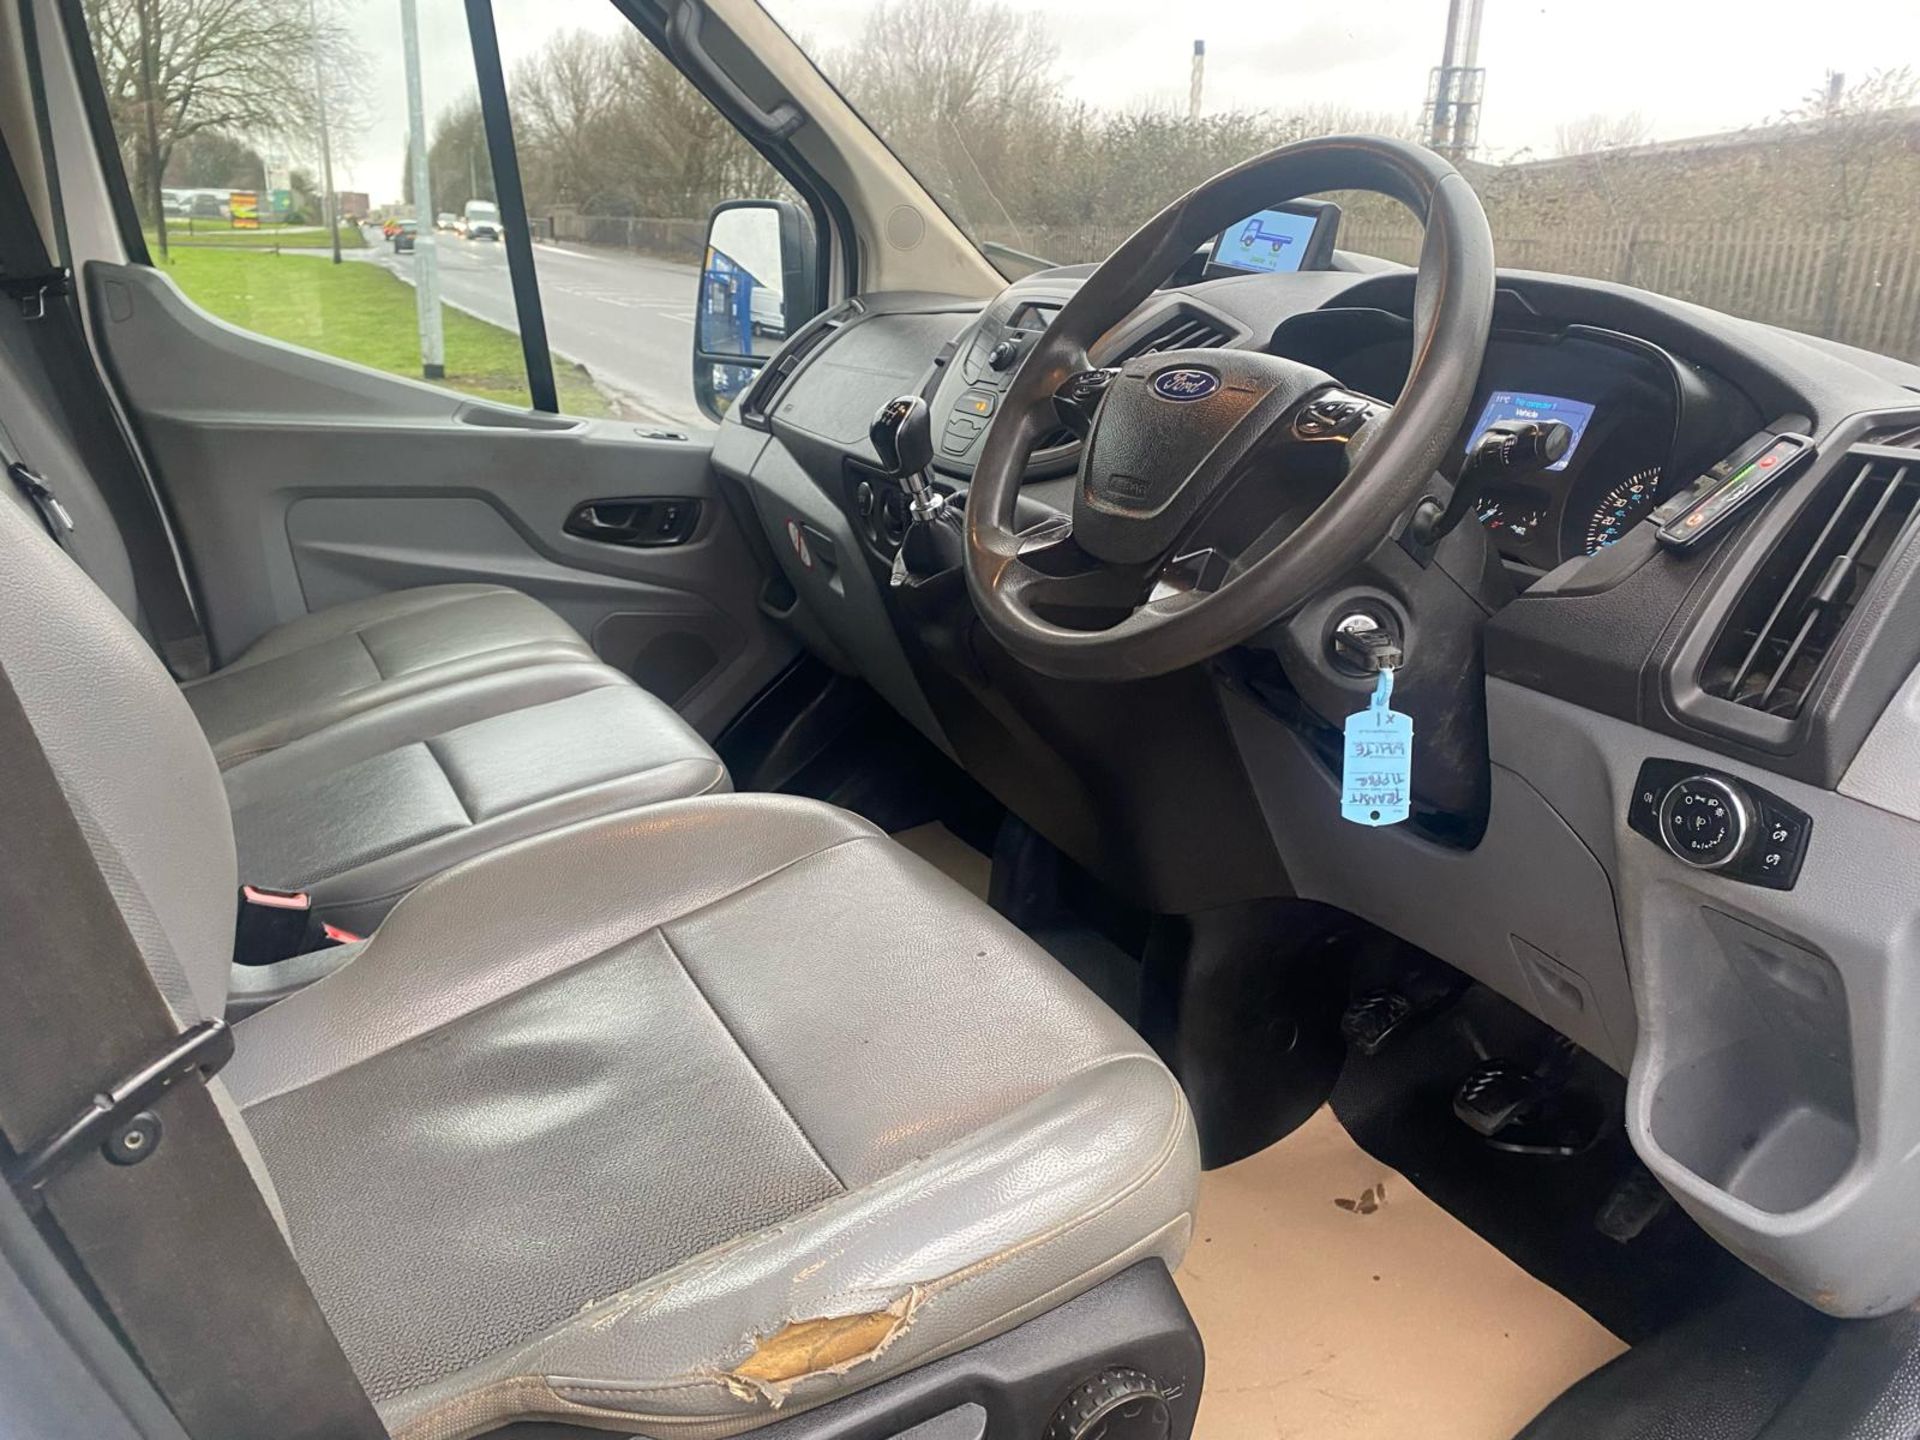 2018 18 FORD TRANSIT 470 TIPPER - 90K MILES - 4.7 TON GROSS - 3 SEATS - RARE TIPPER - TOWBAR. - Image 13 of 15